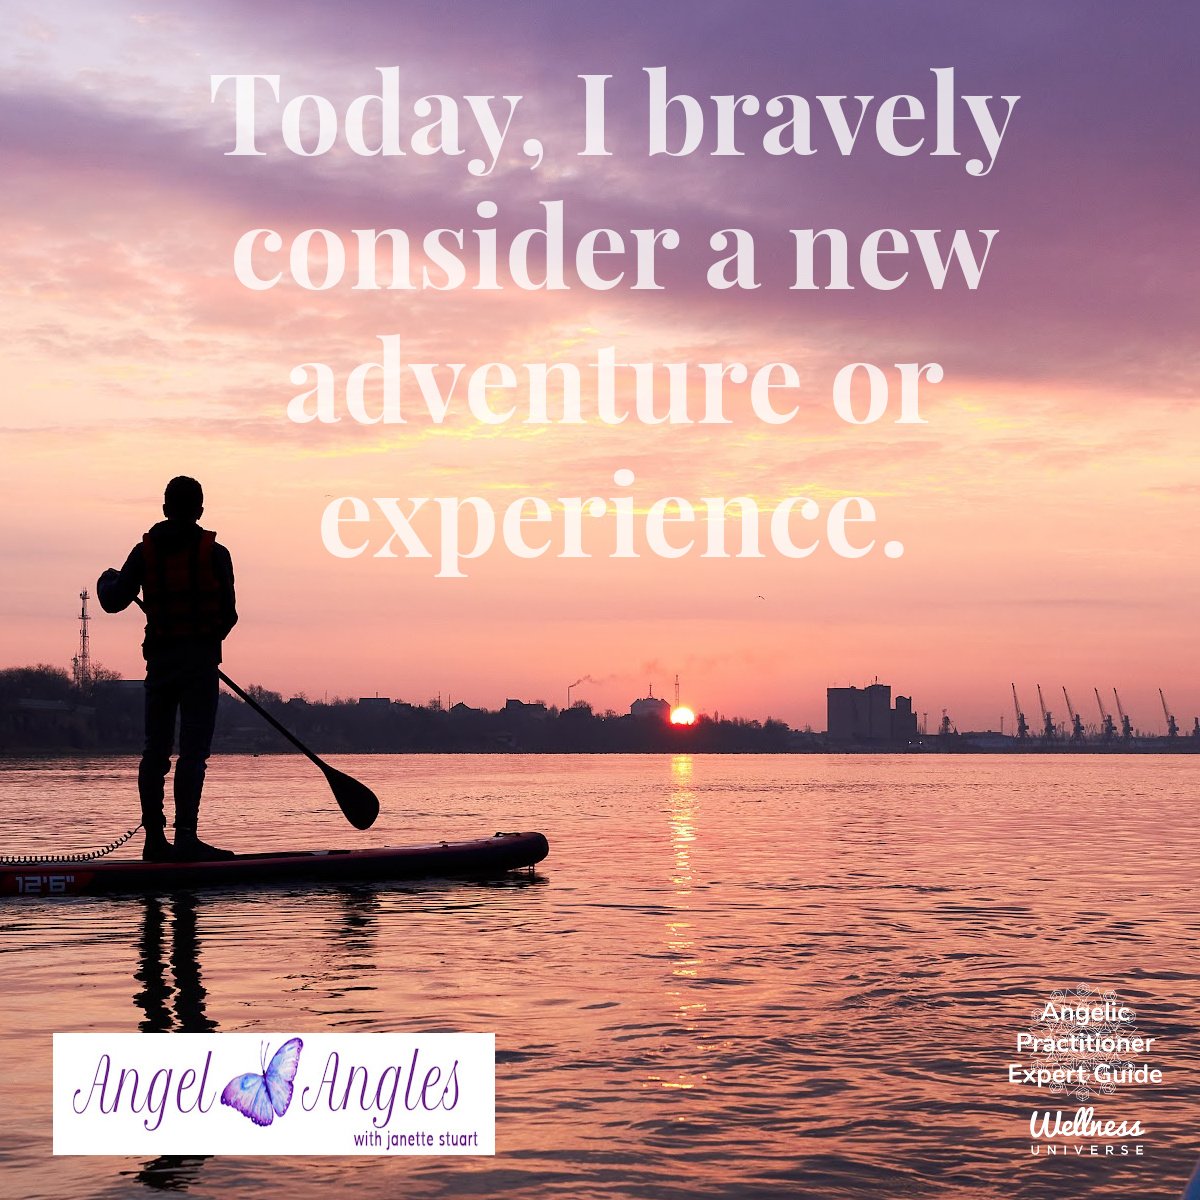 Hello and welcome to your Angel Affirmation for Wed. May 15, 2024. 

Today, I bravely consider a new adventure or experience. 

Blessings of love, joy, and peace.
Love,
Janette 
.
.
#WUVIP #WUWorldChanger #Brave #Adventure #AngelAffirmations